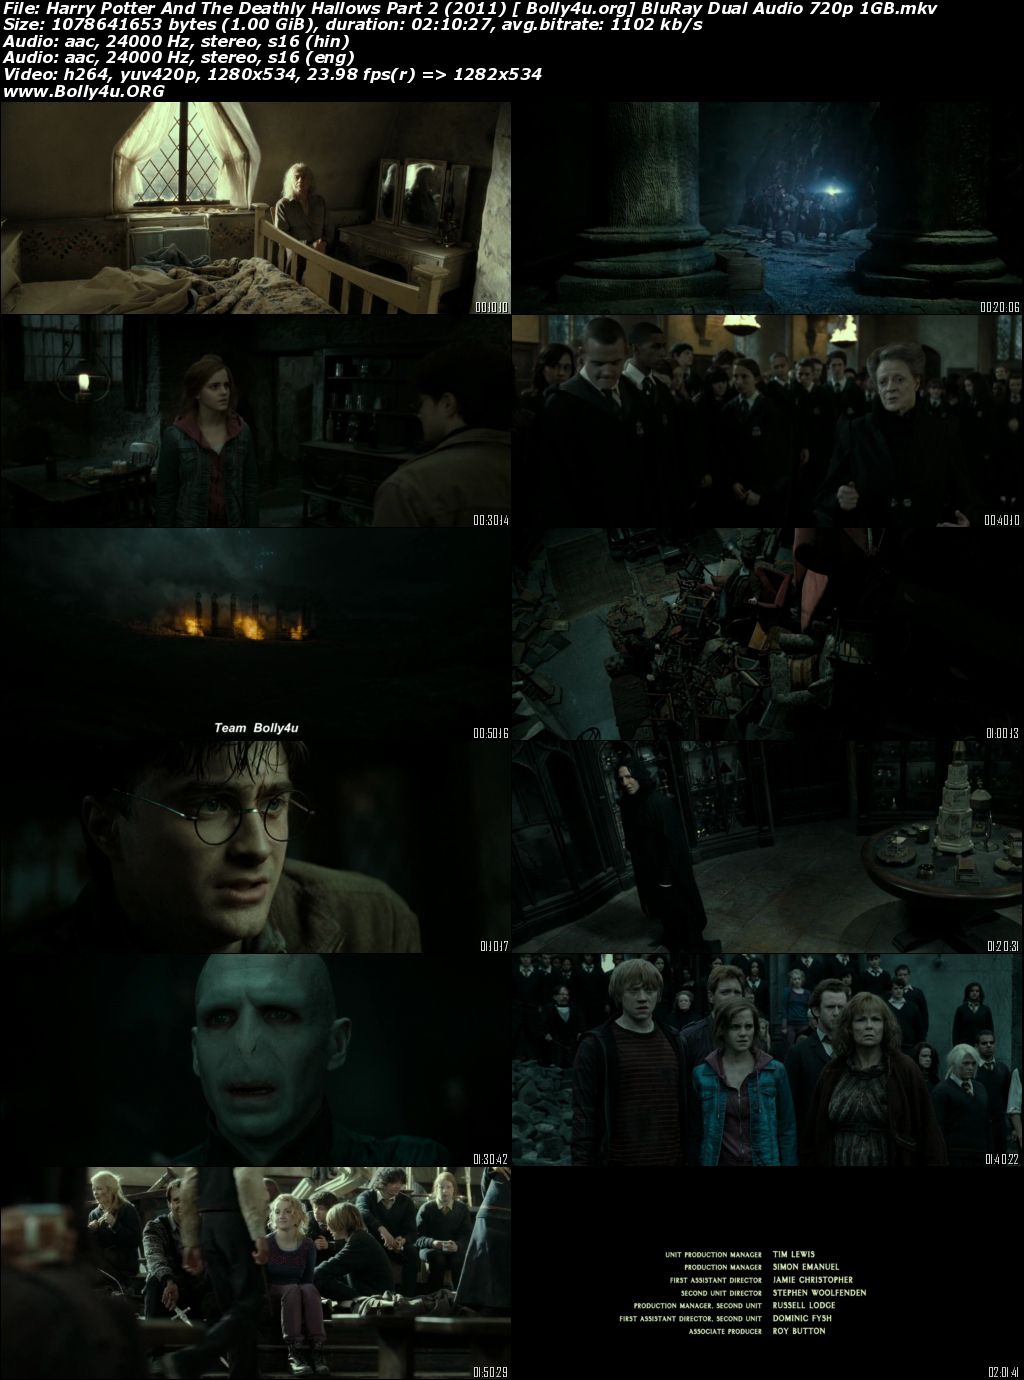 Harry Potter And The Deathly Hallows Part 2 2011 BRRip 400Mb Hindi Dual Audio 480p Download